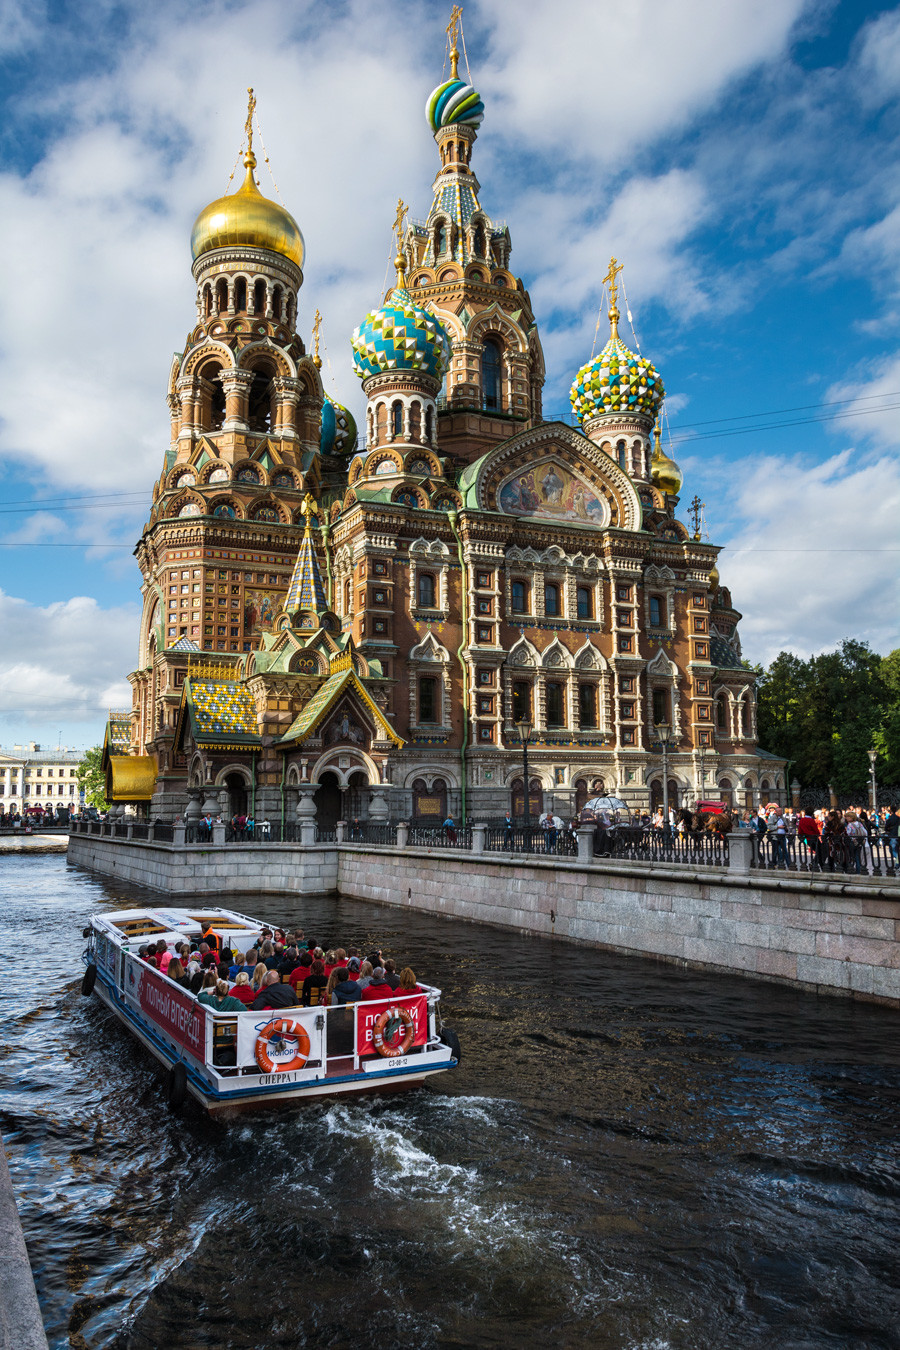 7 Facts About The Church Of The Savior On Spilled Blood In St Petersburg Russia Beyond